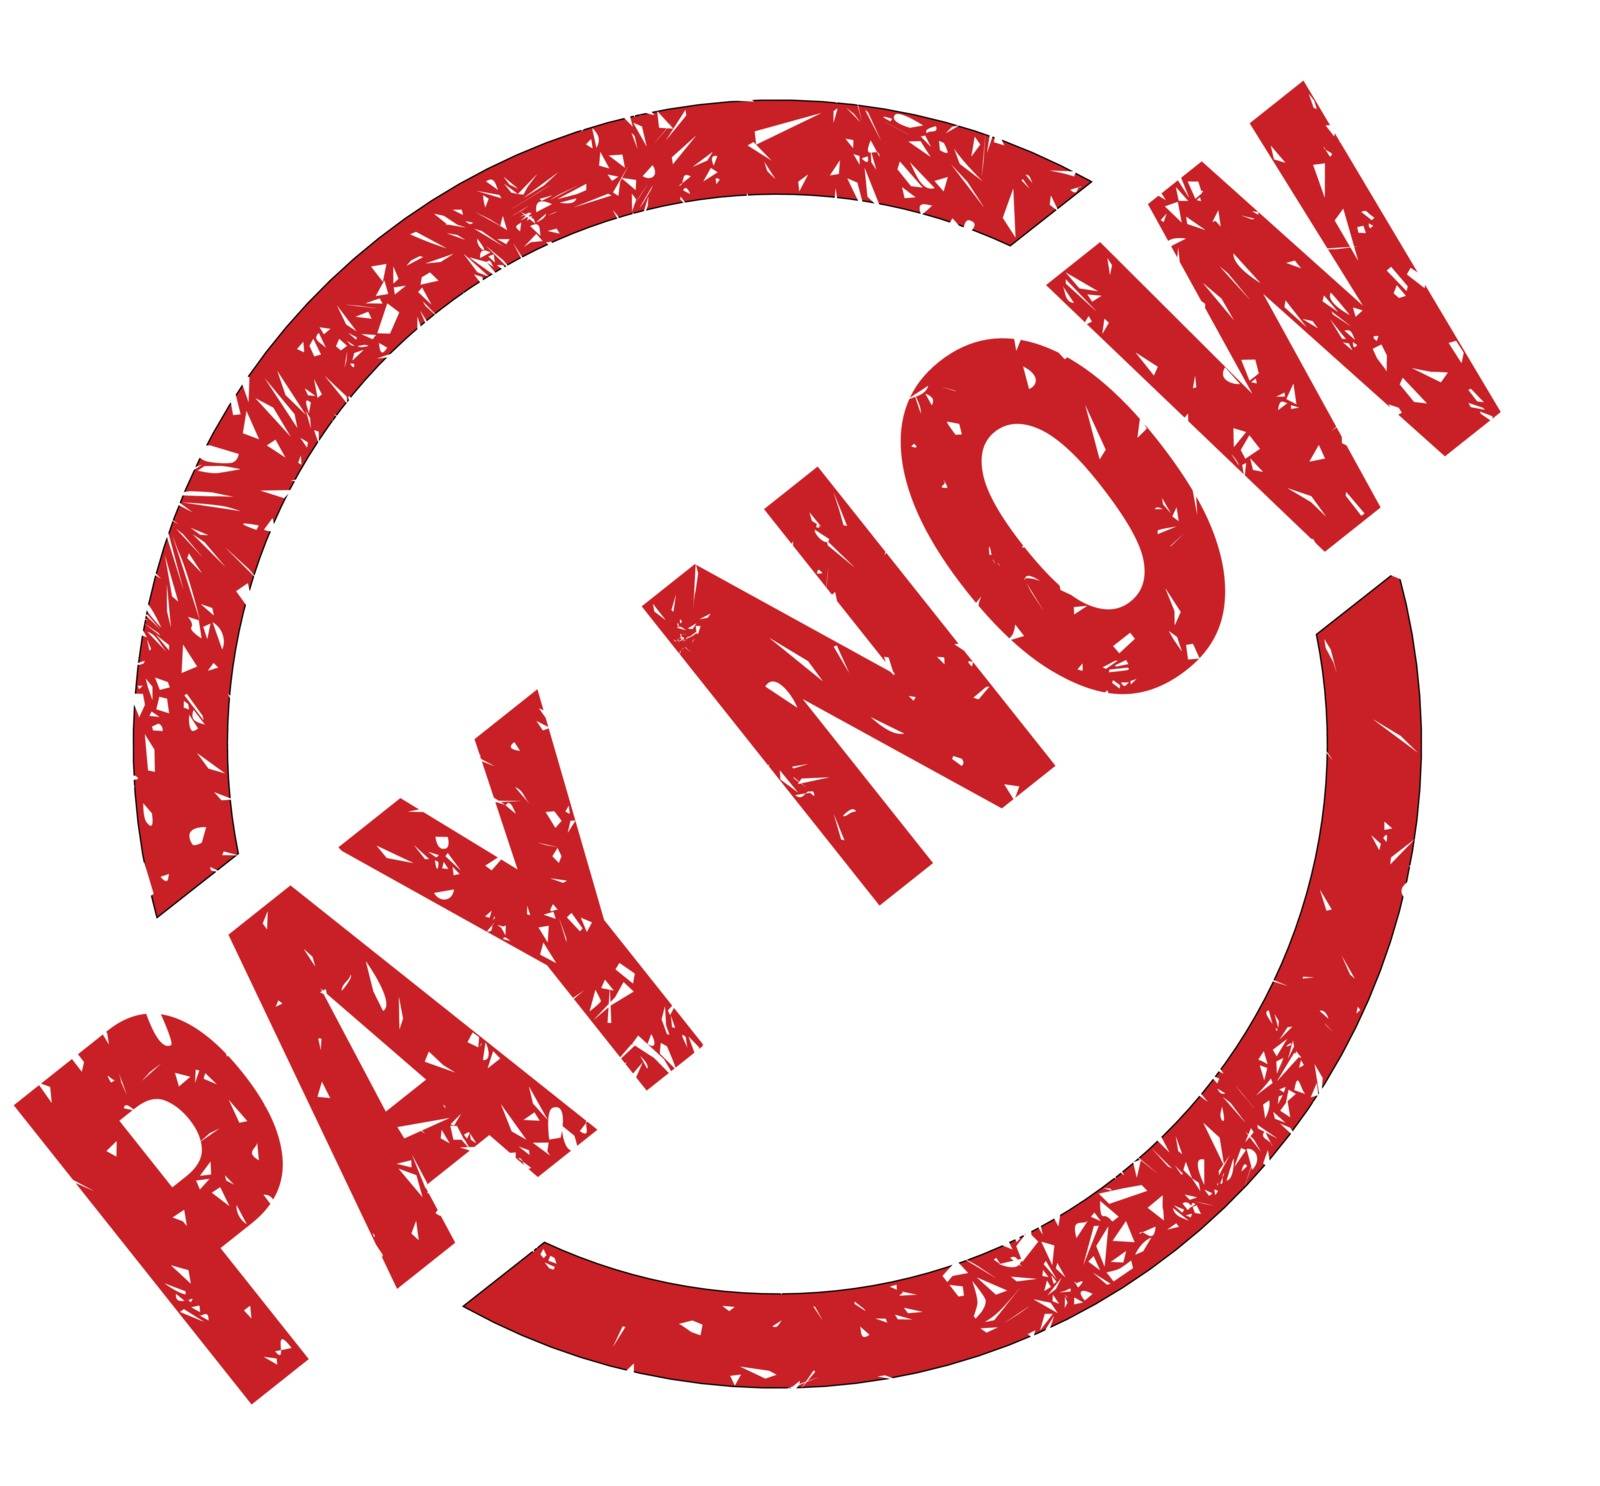 An pay now red ink stamp on a white background